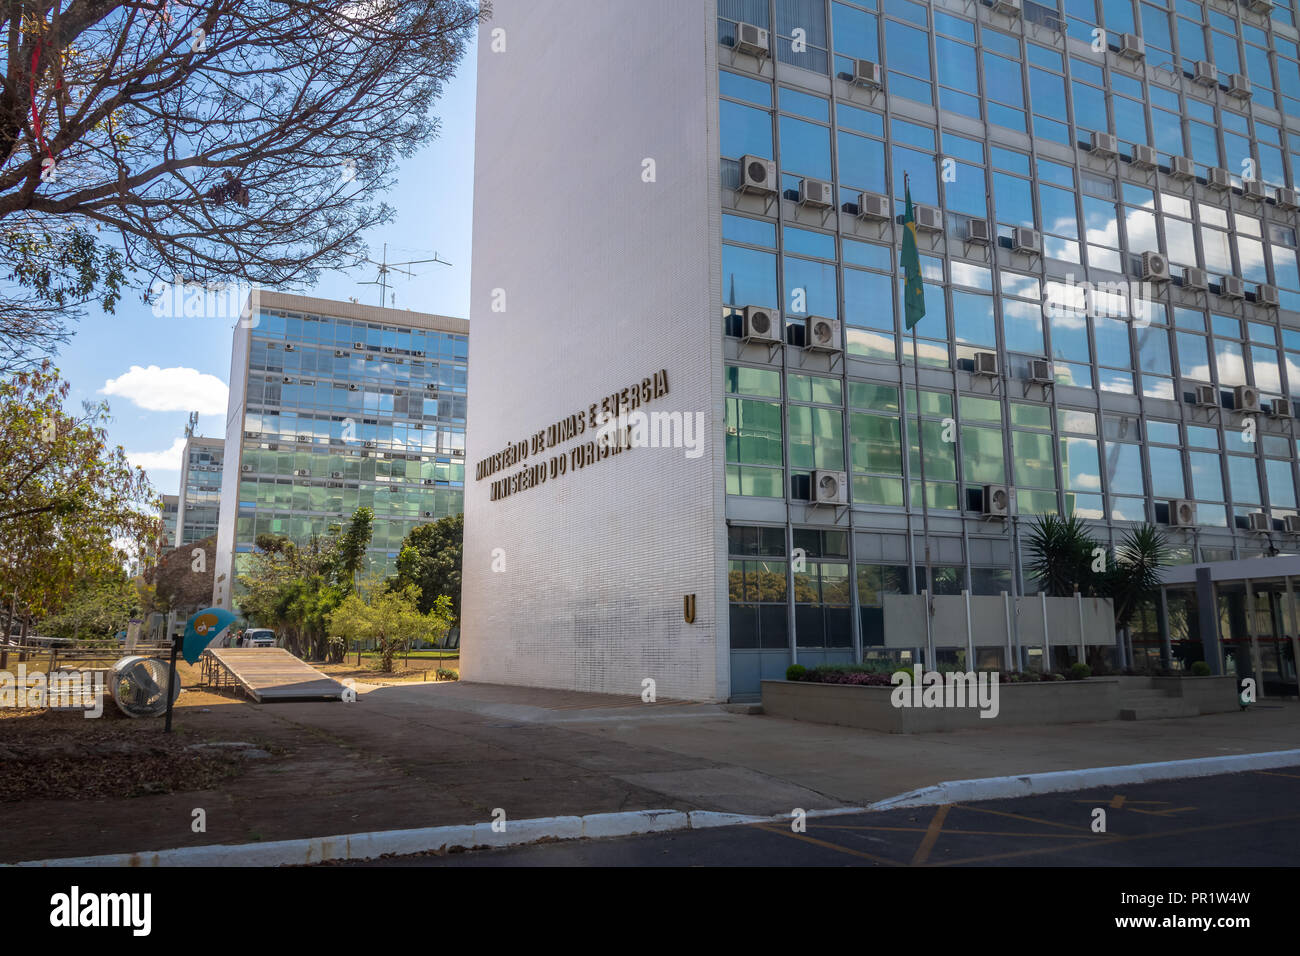 Ministry of Mines and Energy and Ministry of Tourism Building - Brasilia, Distrito Federal, Brazil Stock Photo